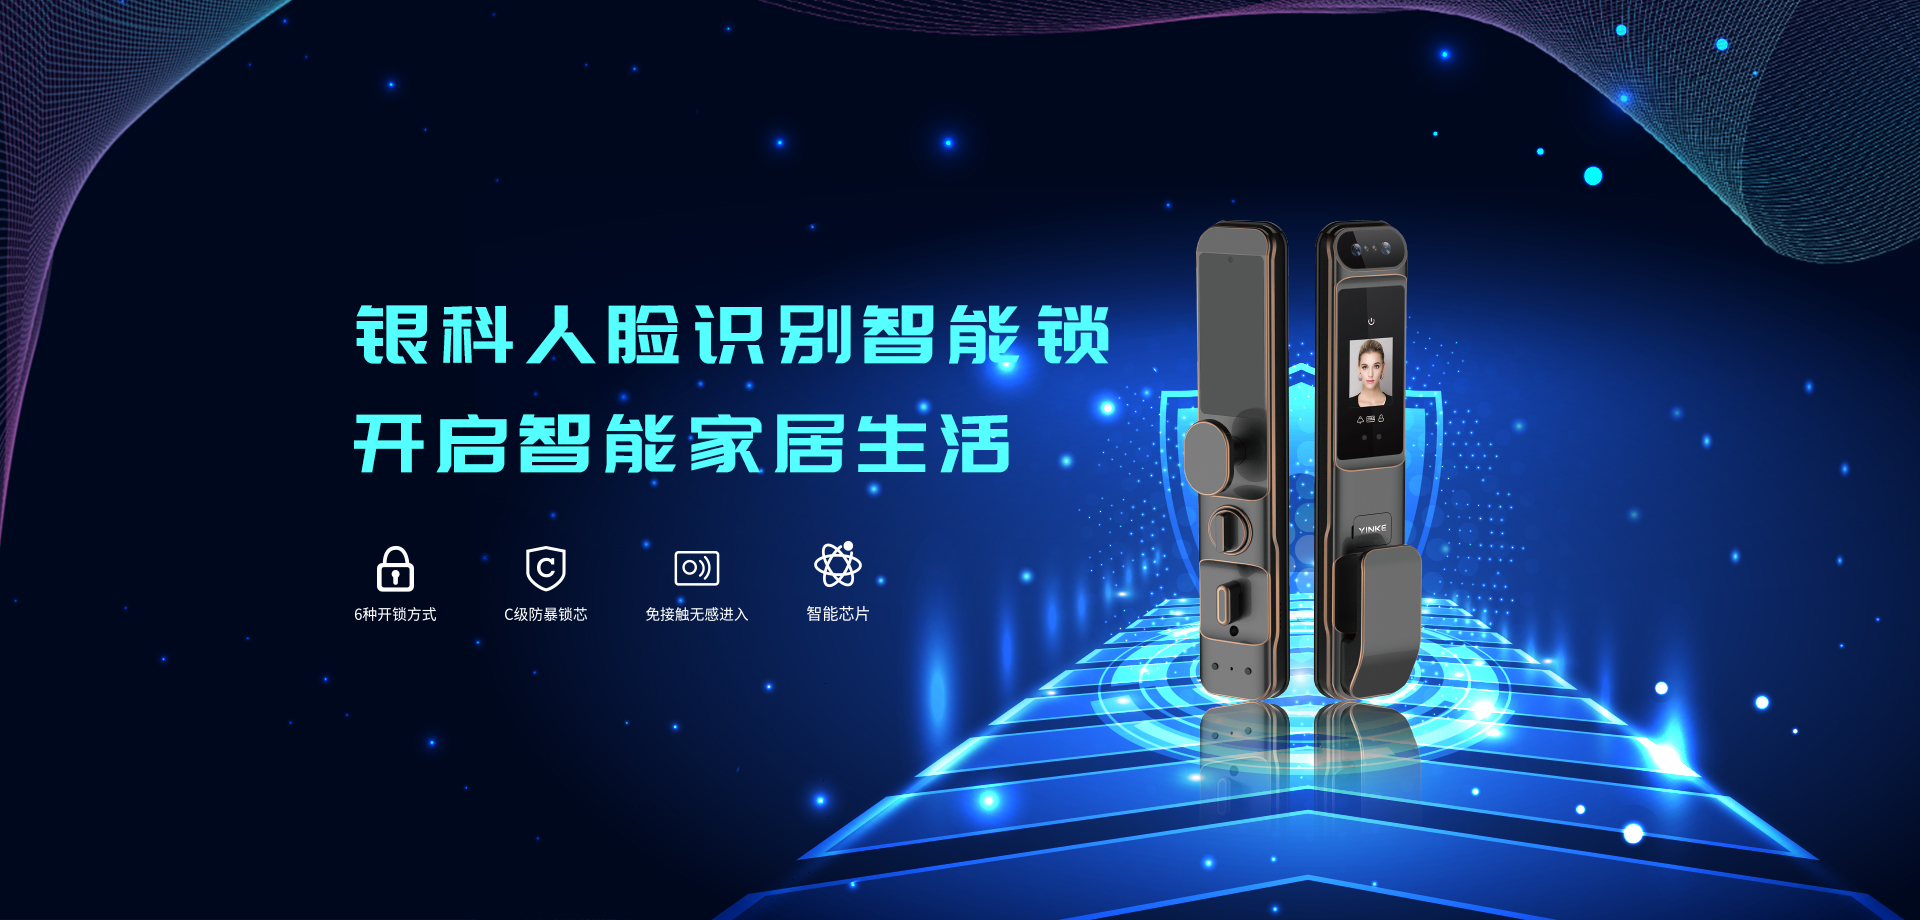 Yk01 Automatic Face Recognition brings you into the "contactless" era and enjoy a better l